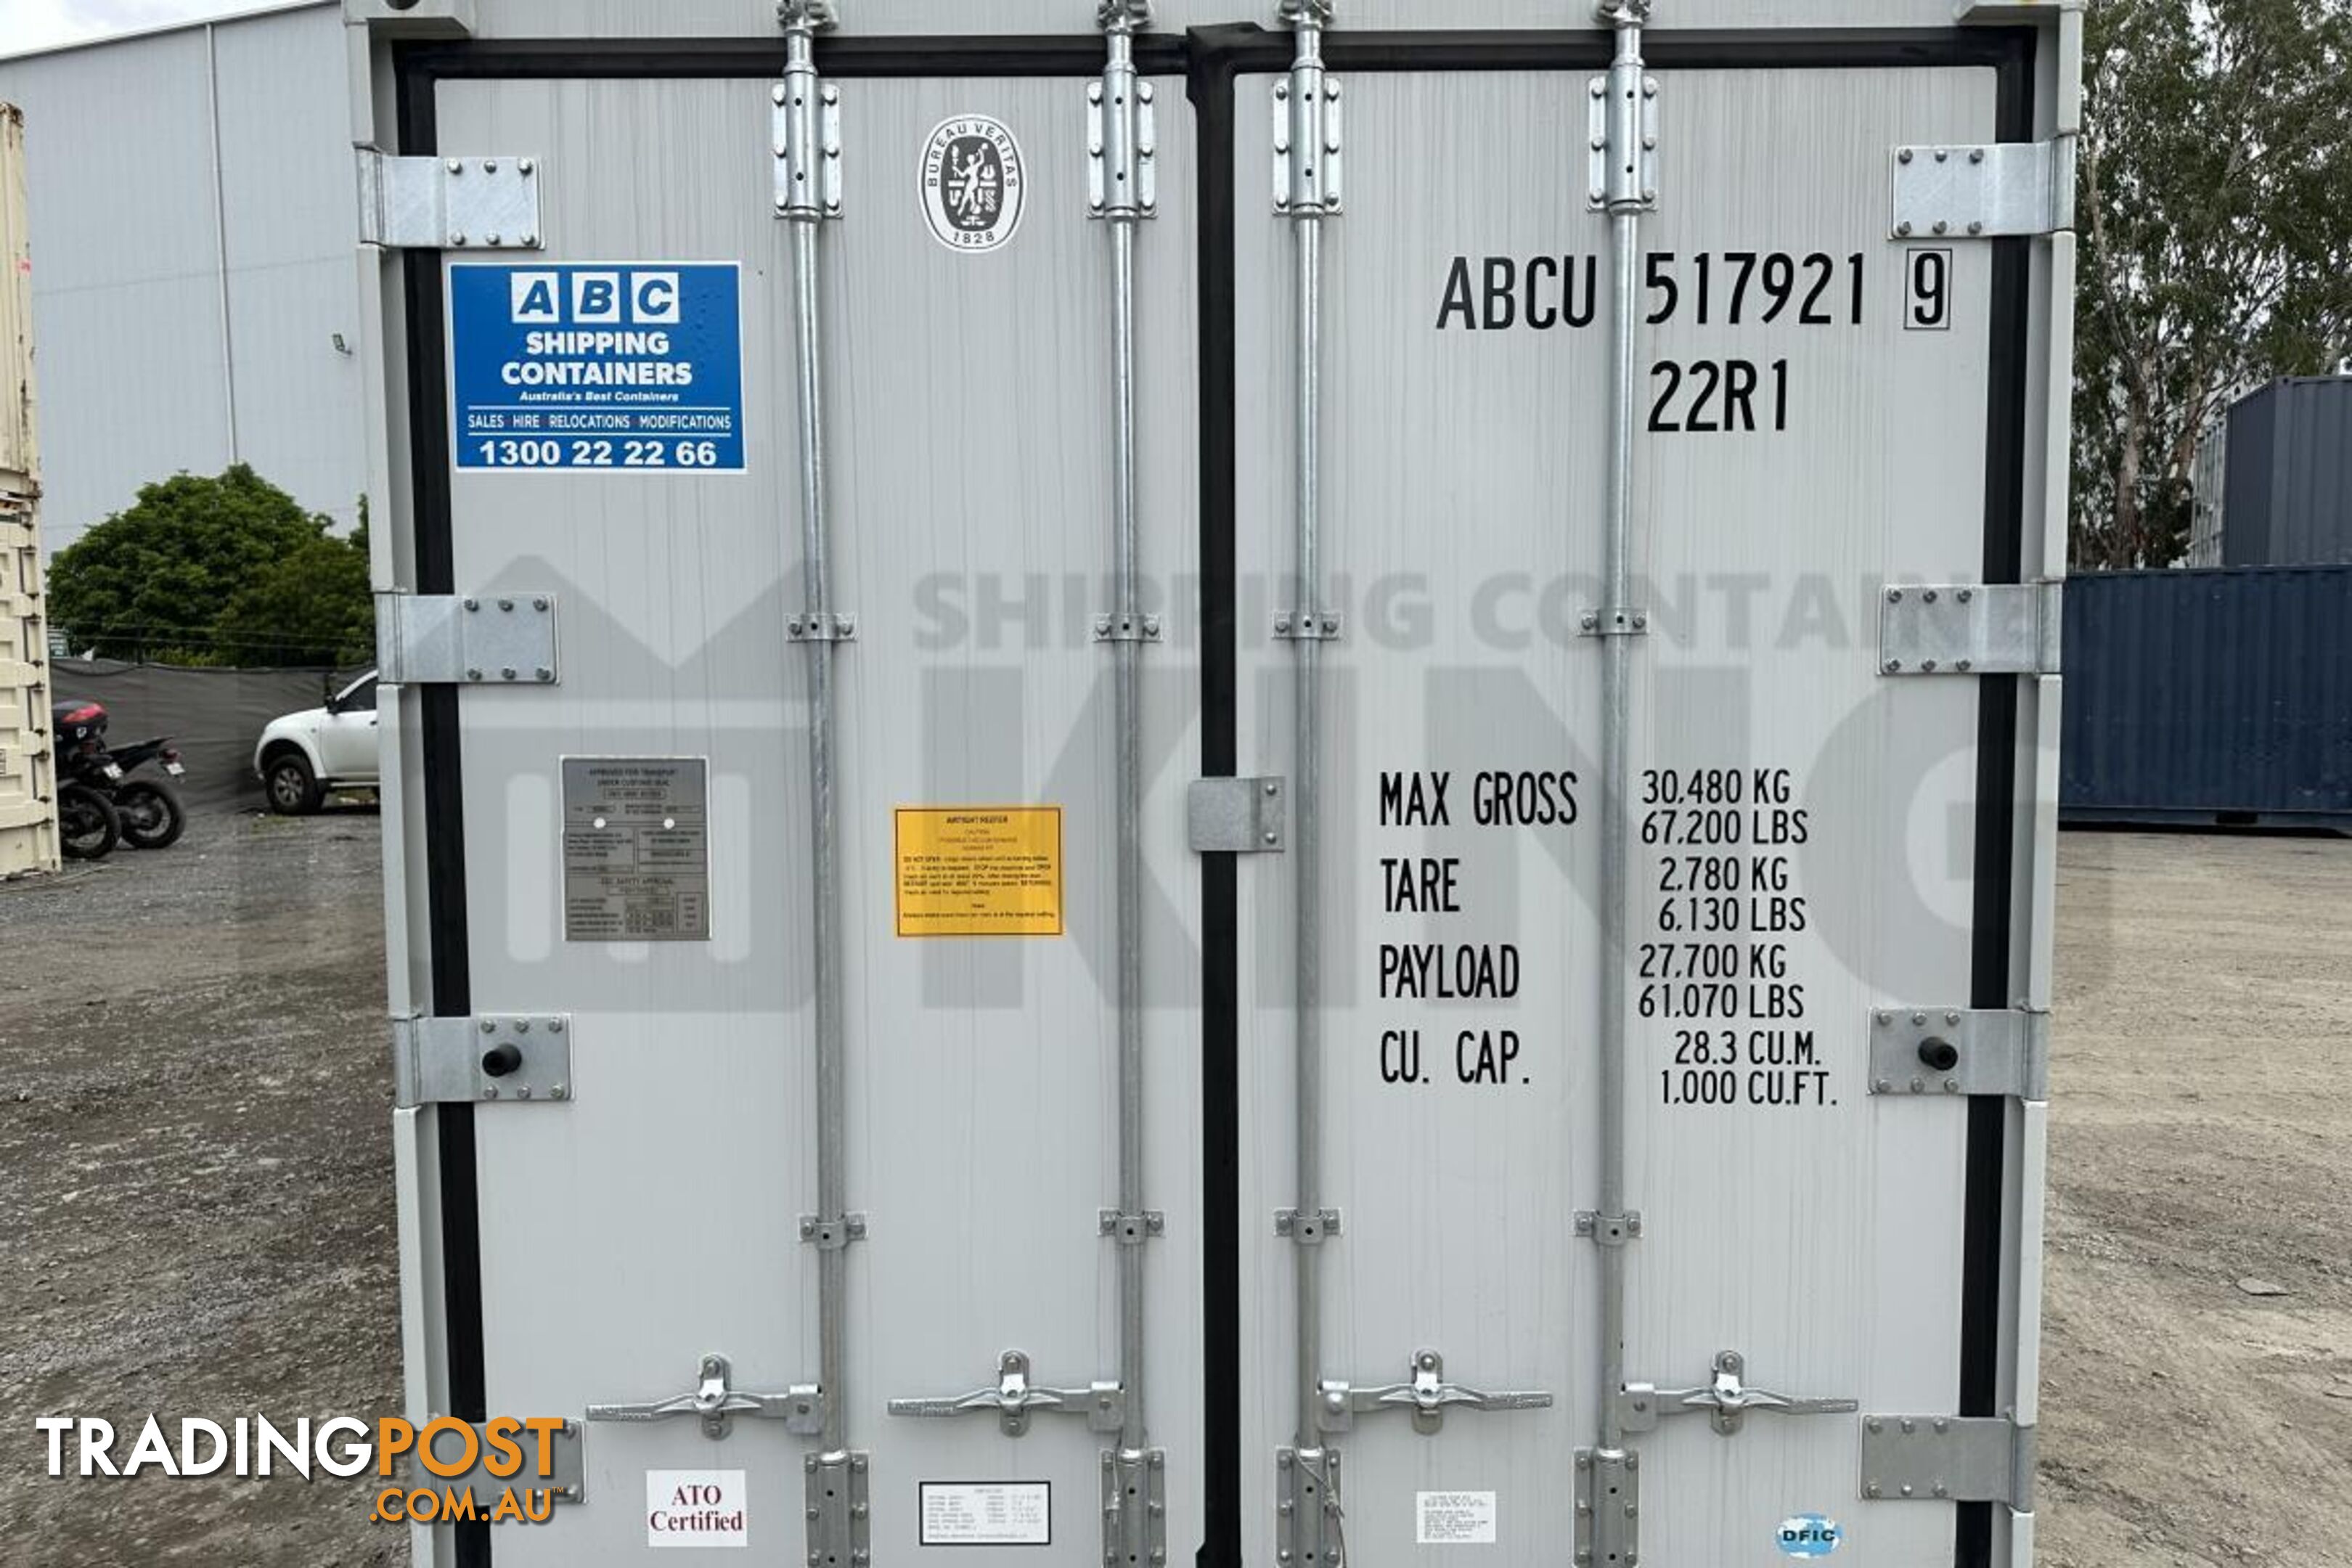 20' STANDARD HEIGHT REFRIGERATED "REEFER" SHIPPING CONTAINER (OPERATIONAL) - in Brisbane